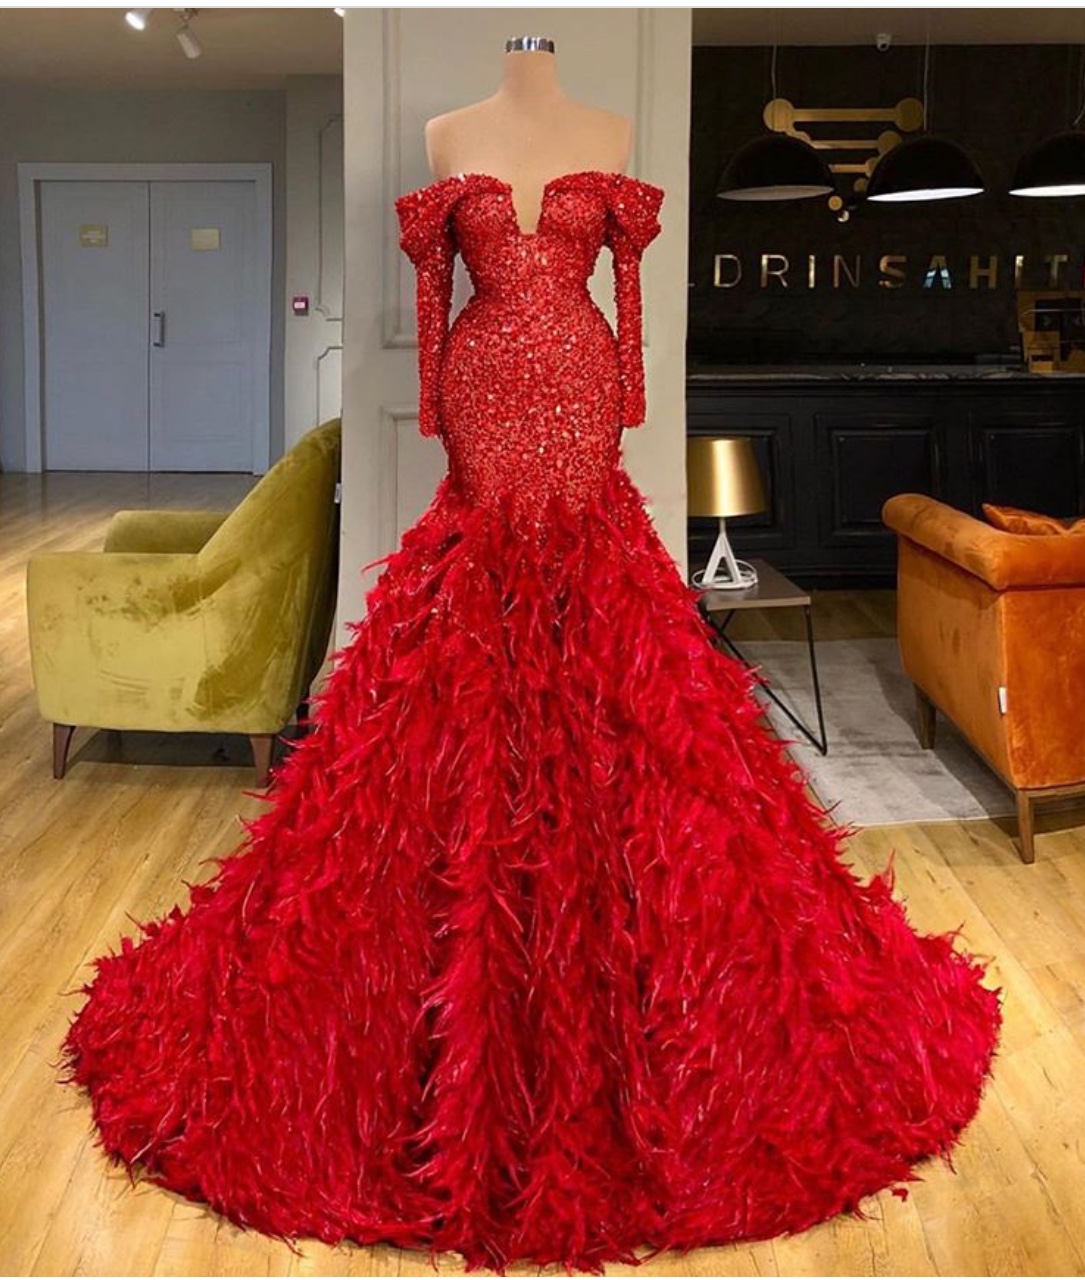 35 Red Dresses for a Showstopping Holiday Look | Vogue